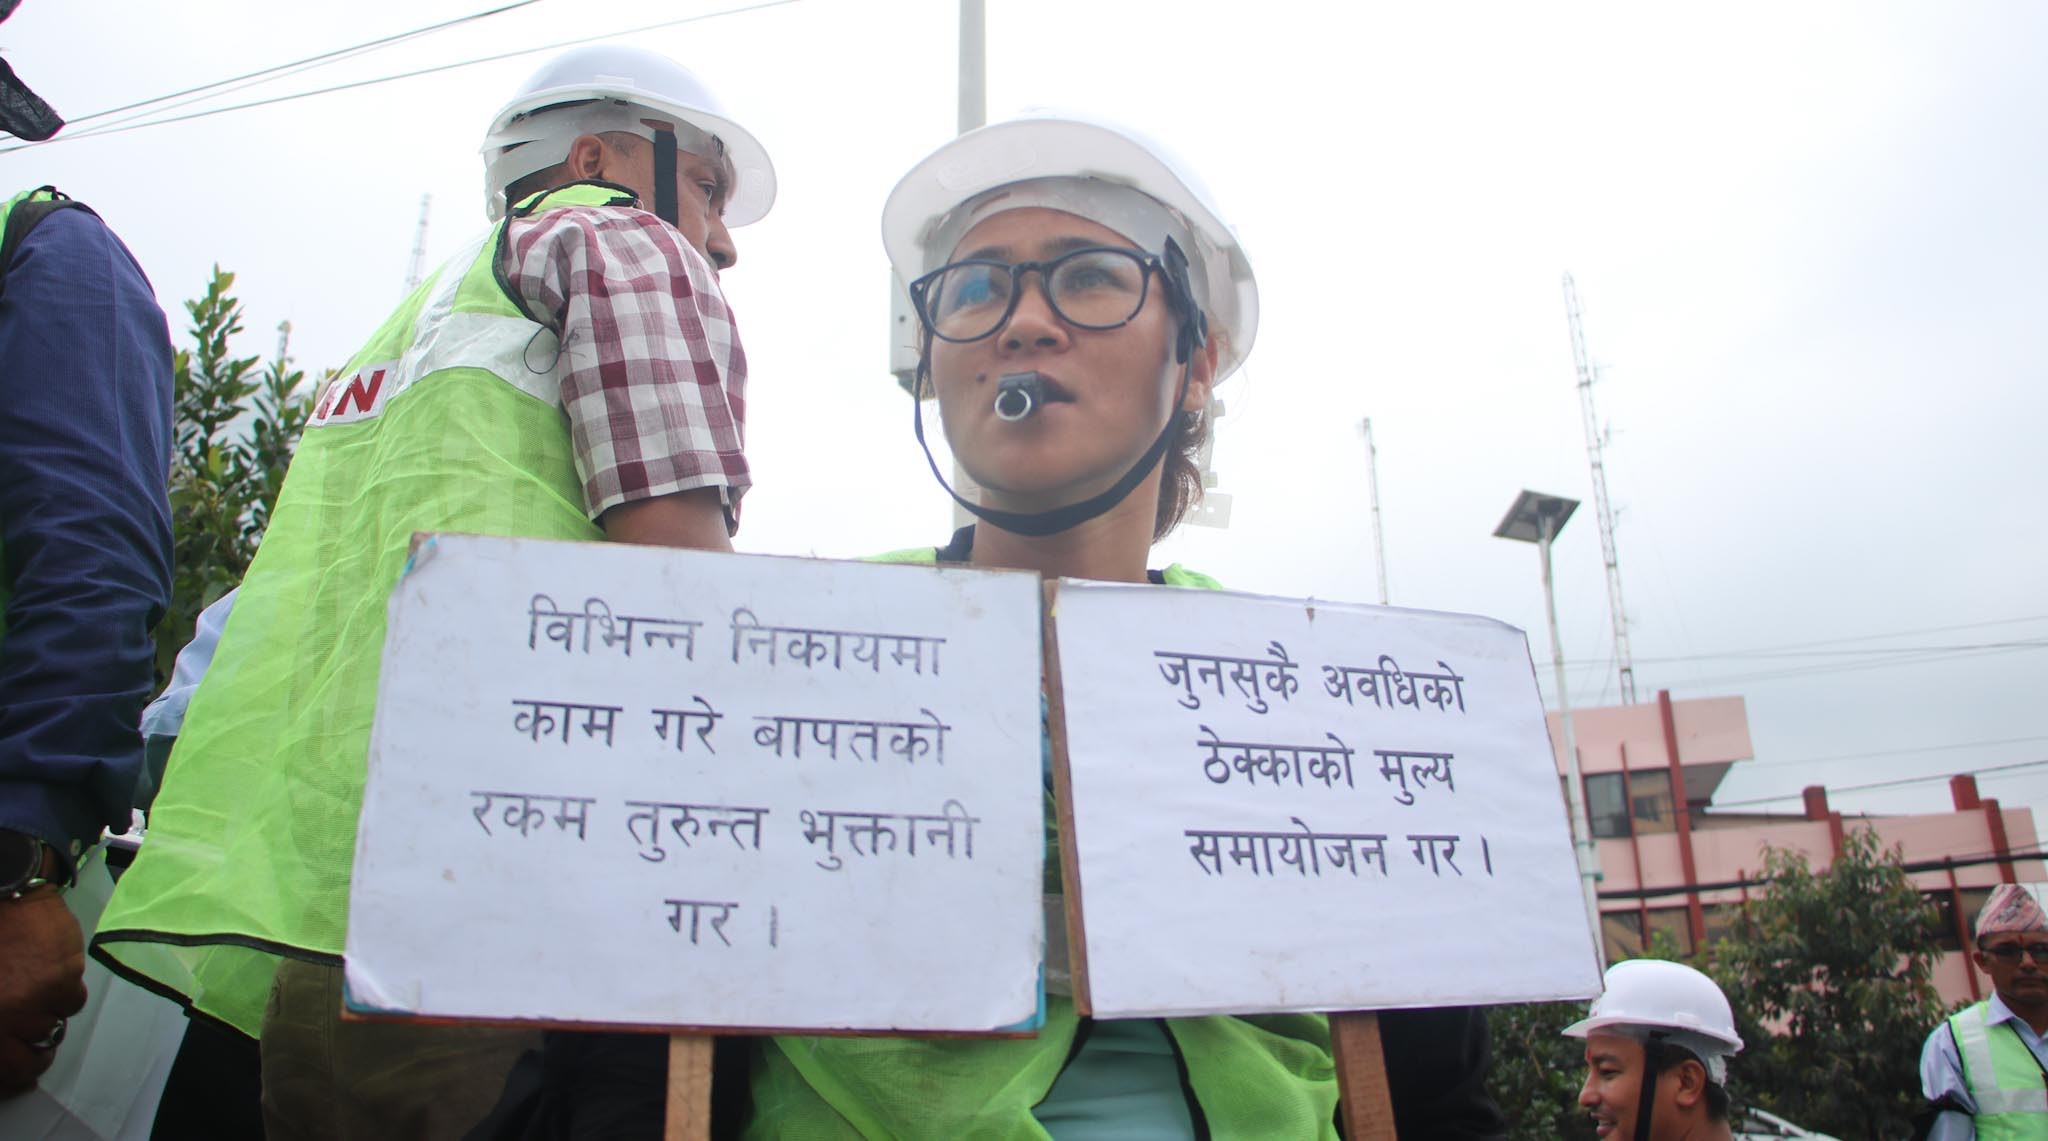 Construction workers blow whistle in Baneshwor (photos)